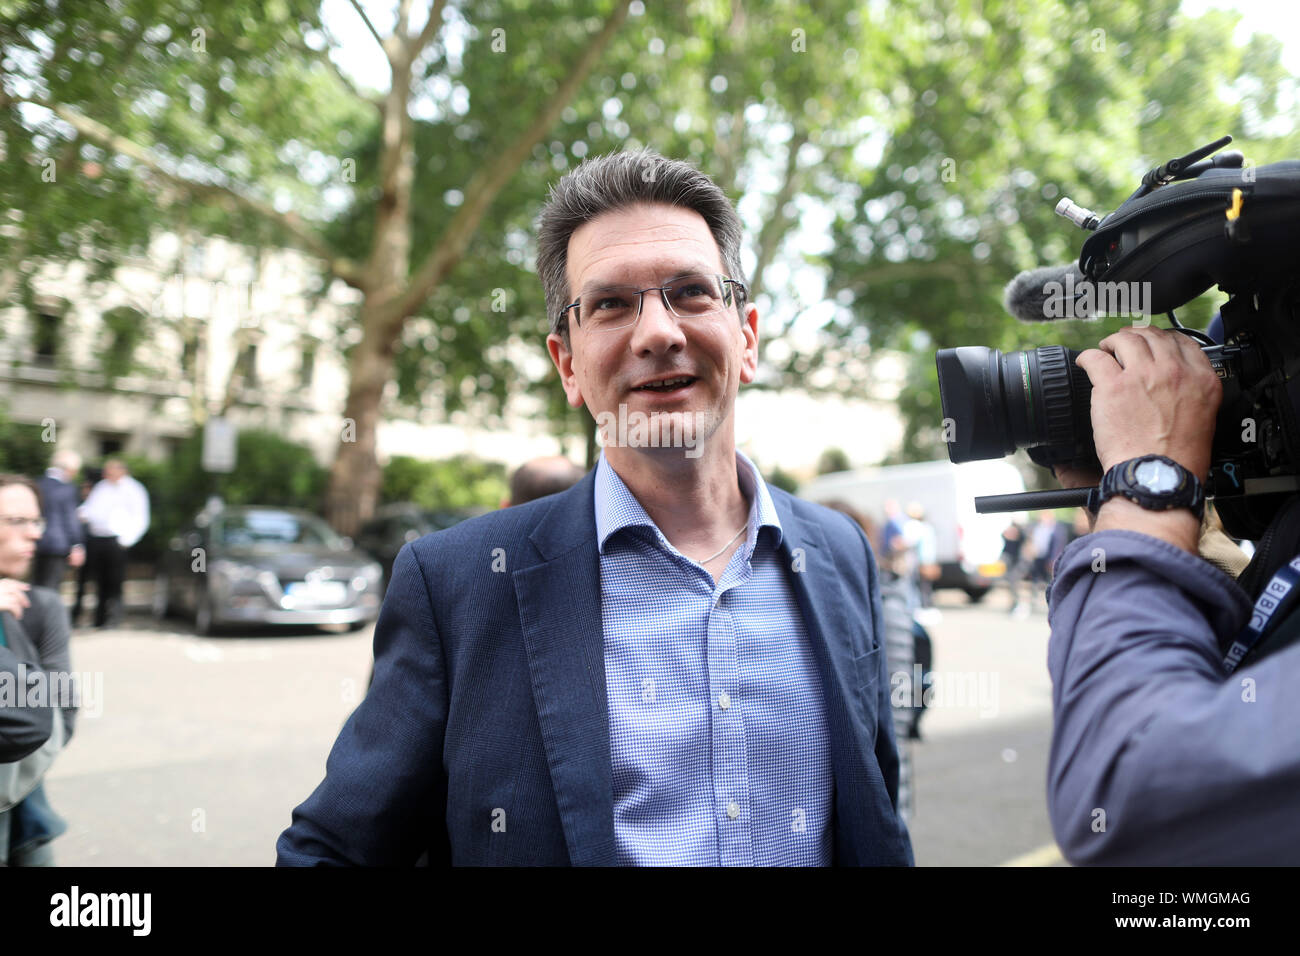 Pic shows: Steve Baker  - Tory MP  seen here at  press conference for  Boris Johnson’s leadership campaign in London   June 2019   picture by Gavin Ro Stock Photo